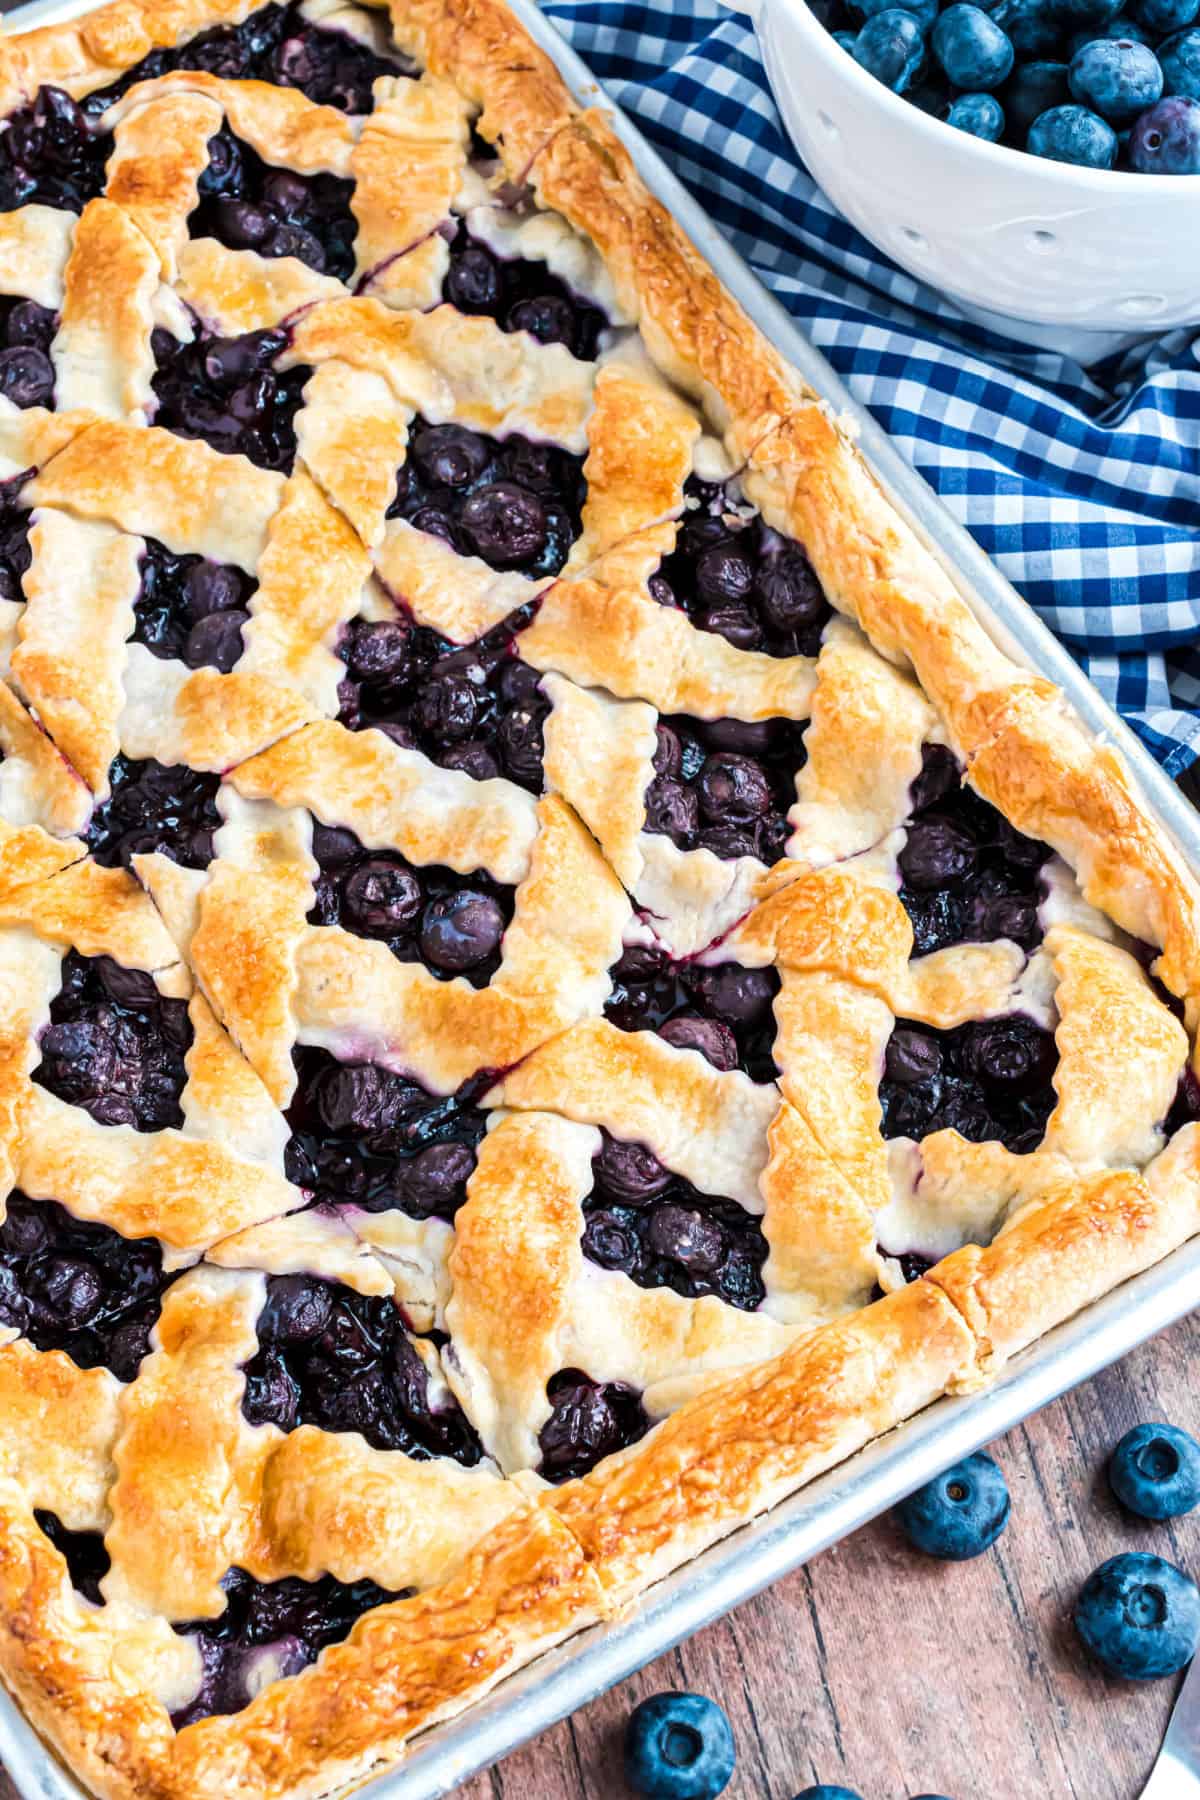 Blueberry pie baked in a sheet pan with a lattice top.